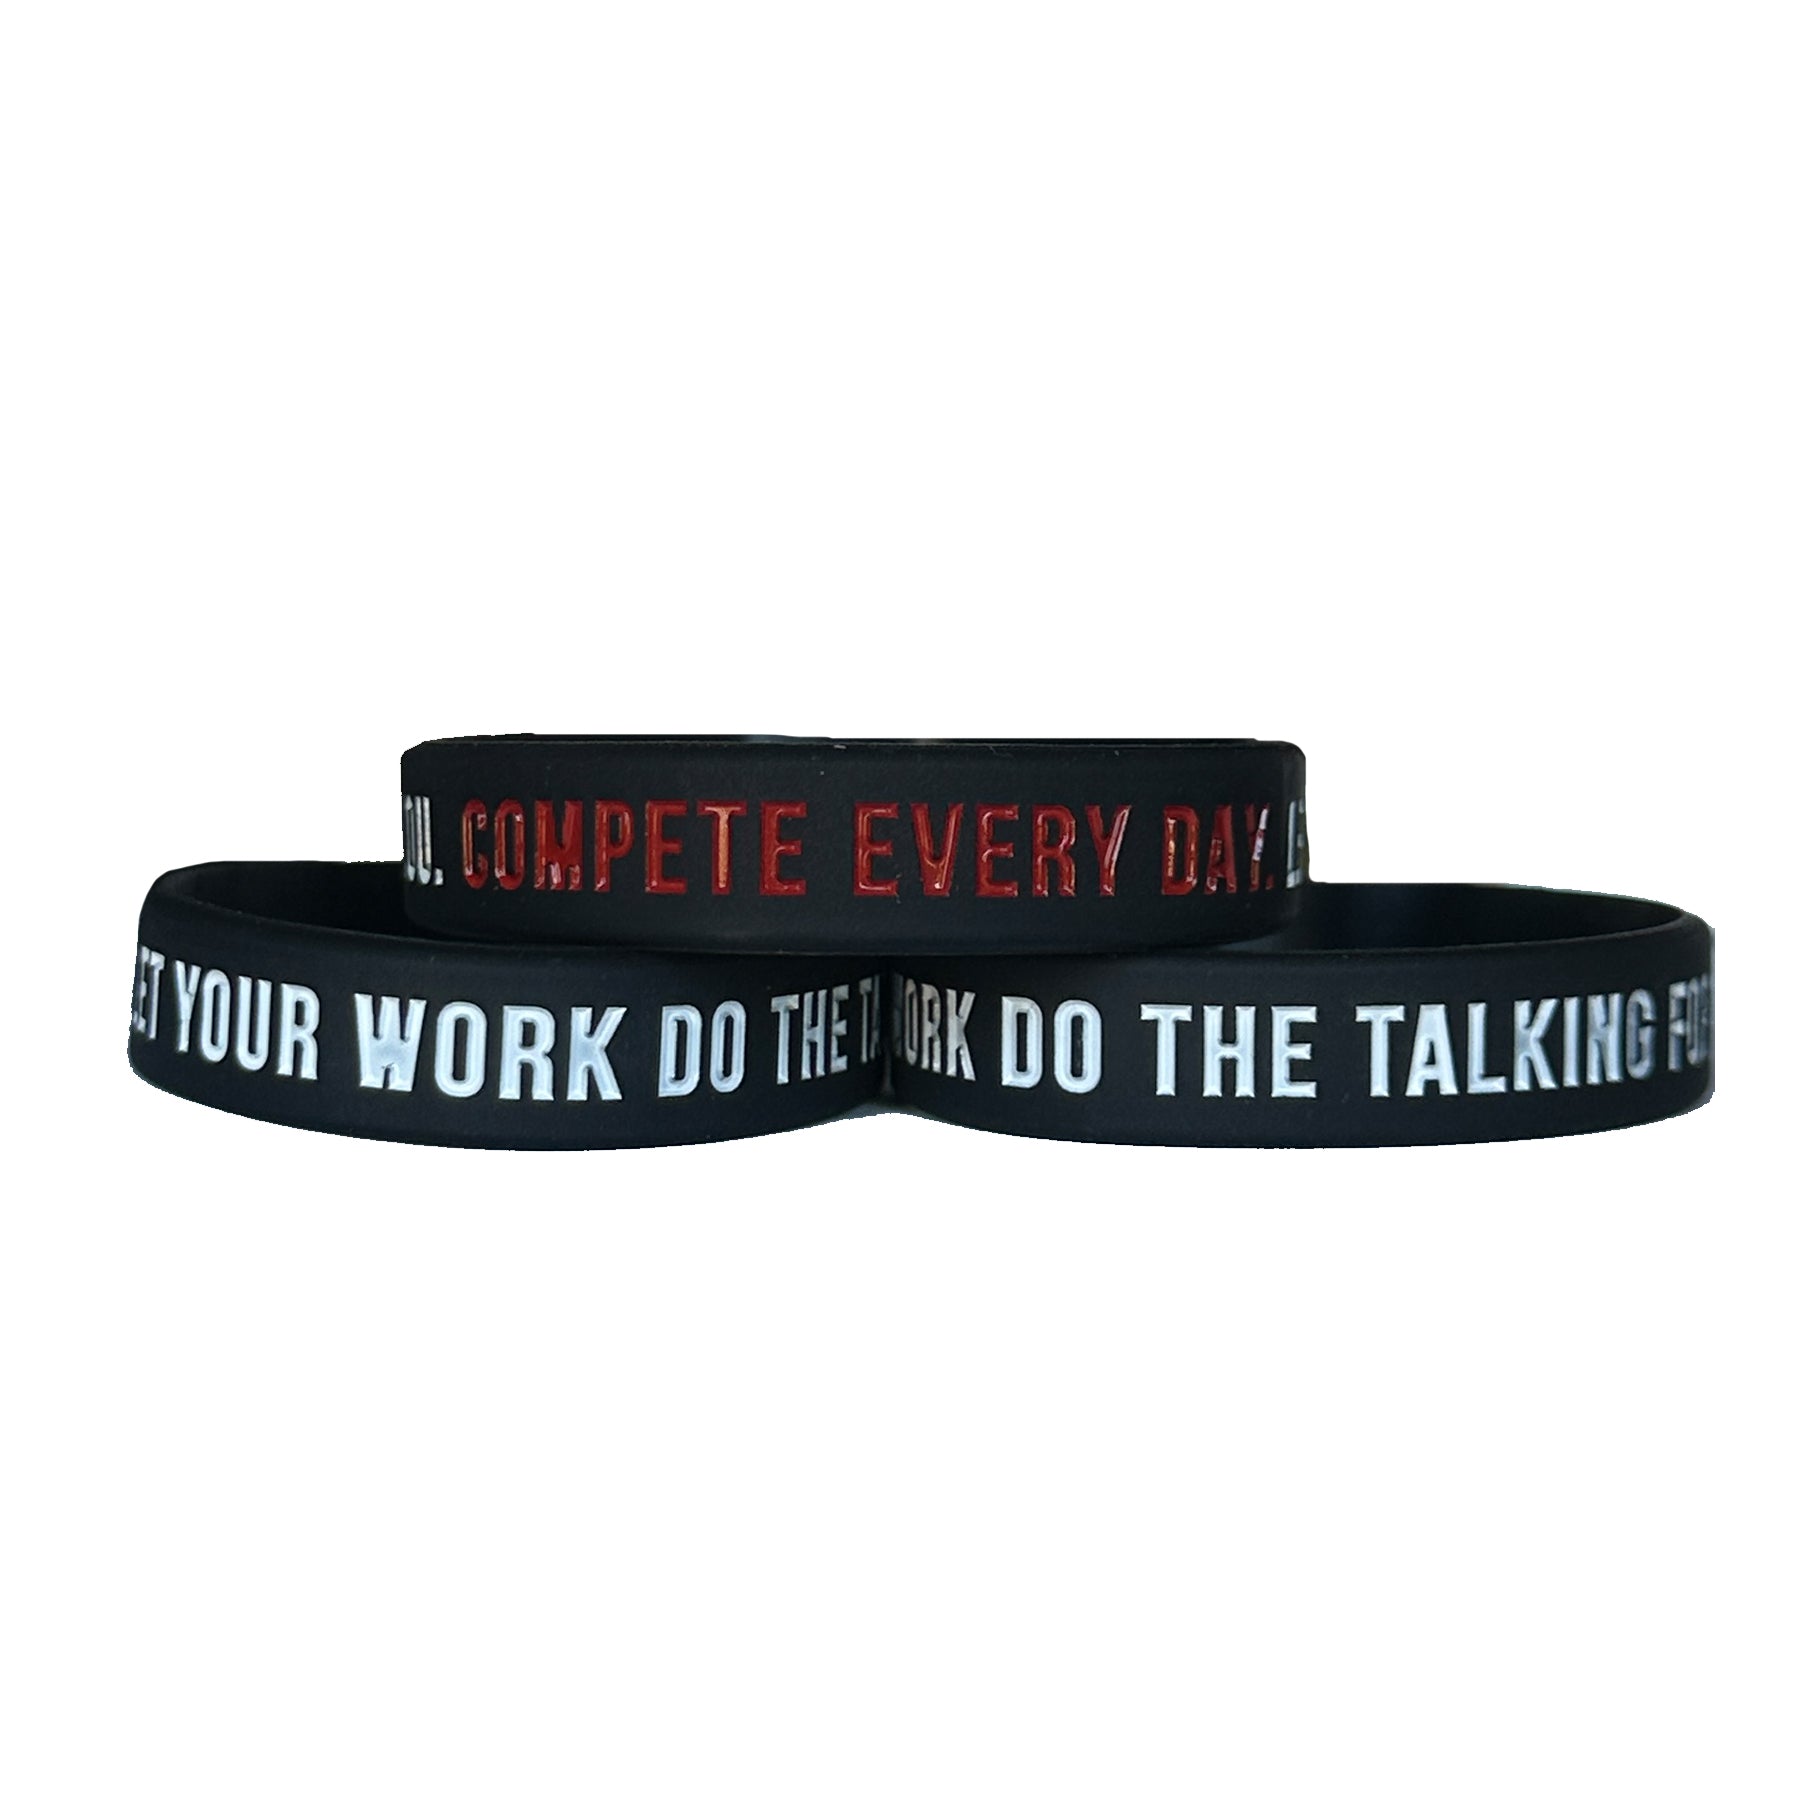 Move in Silence (Youth Wristband)